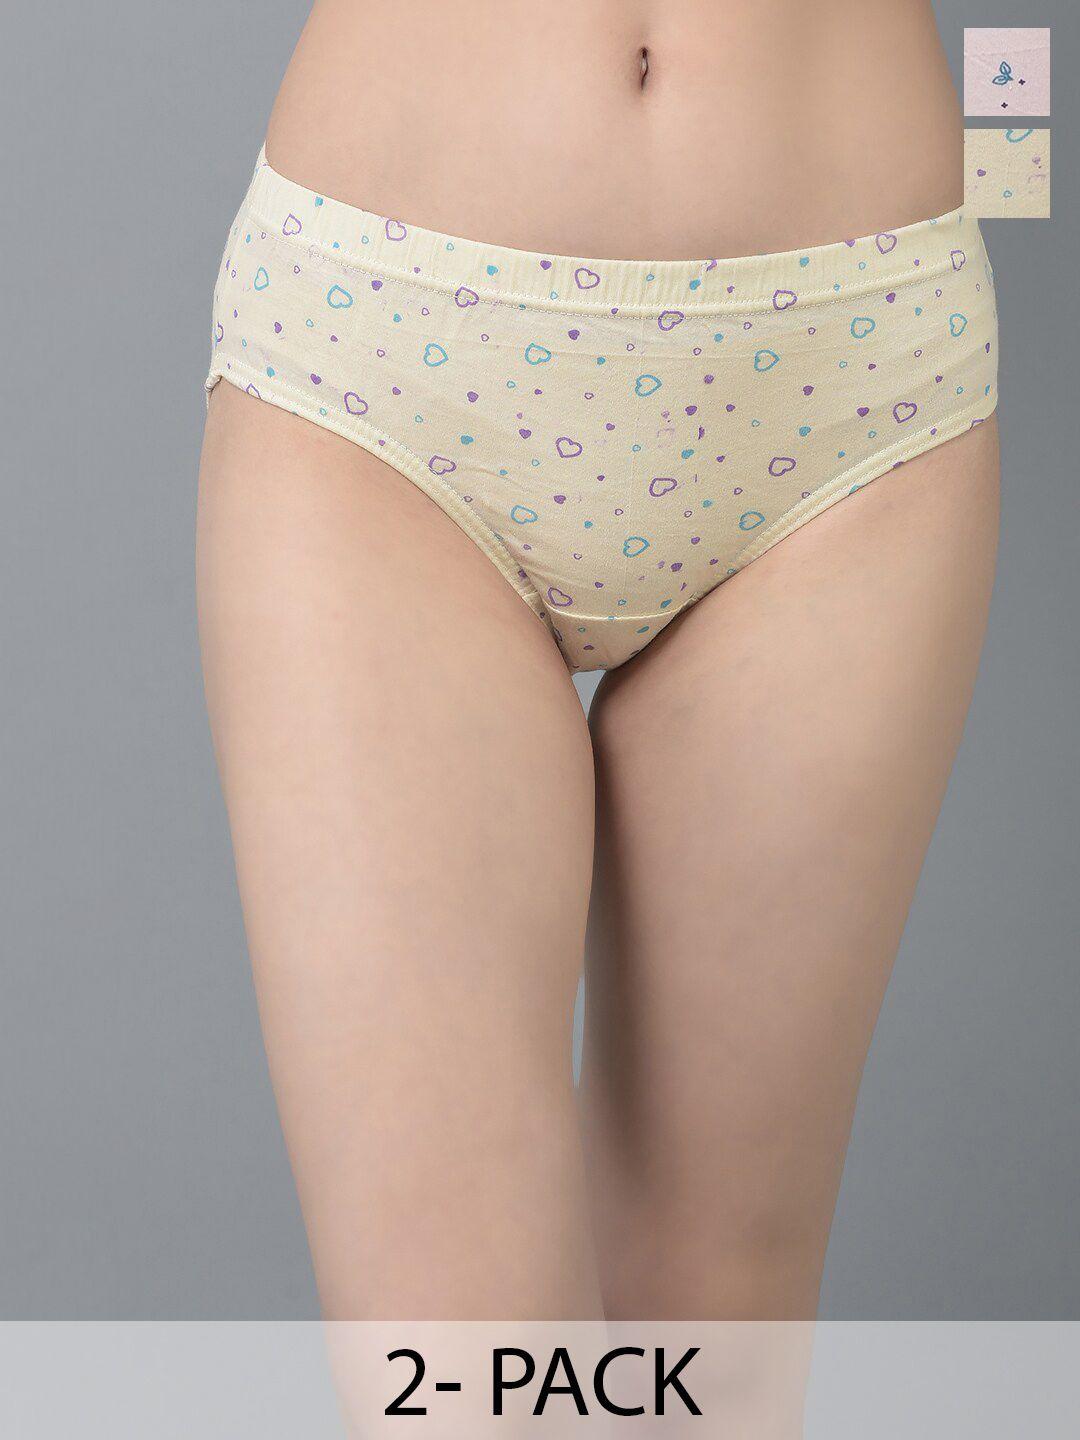 dollar missy pack of 2 anti microbial printed pure cotton hipster briefs